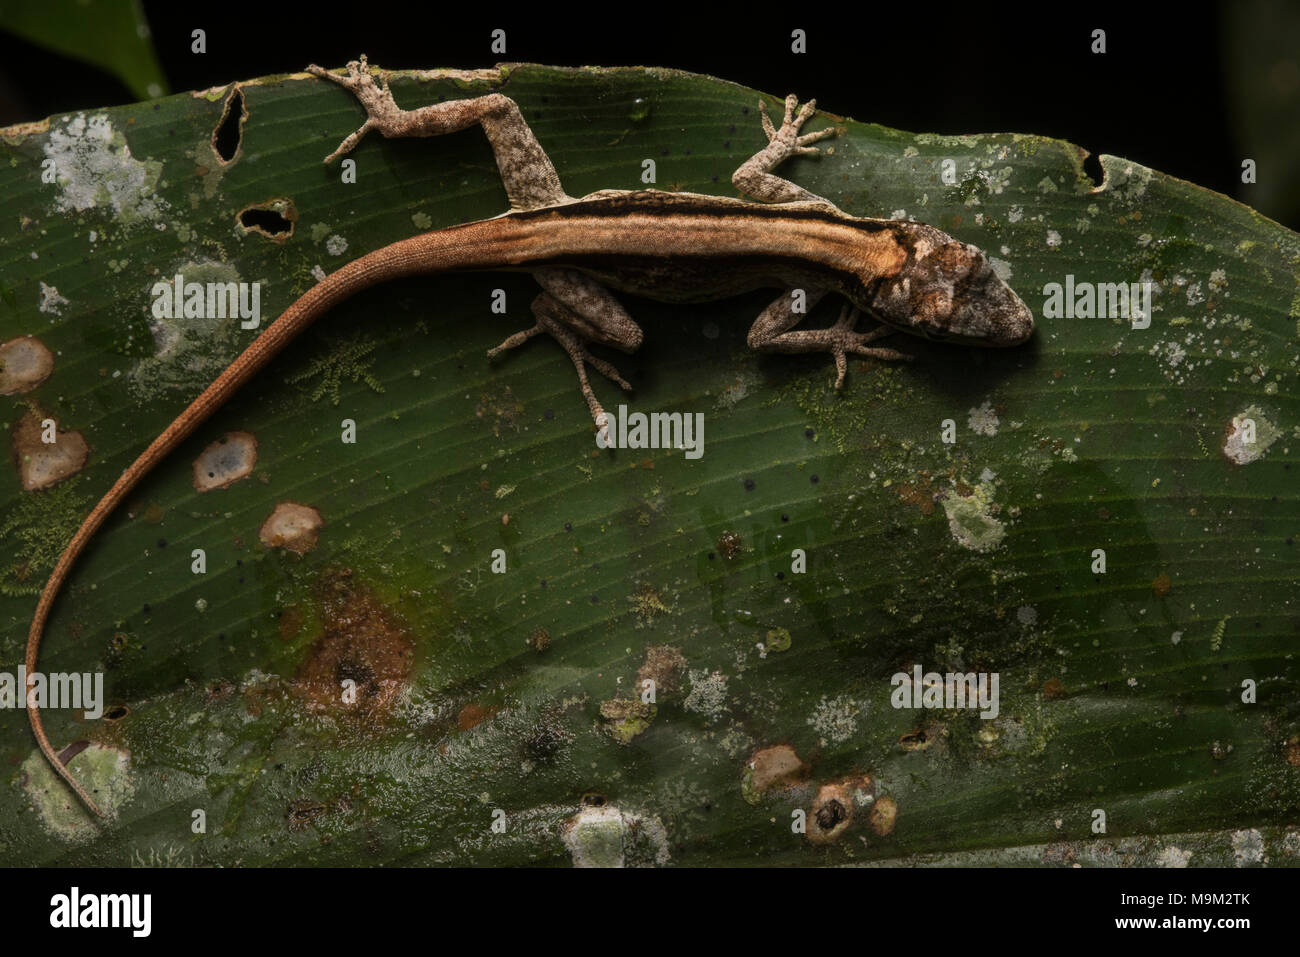 A small Anole lizard sleeps on a leaf that also has some fungus or lichen growing on it. Stock Photo